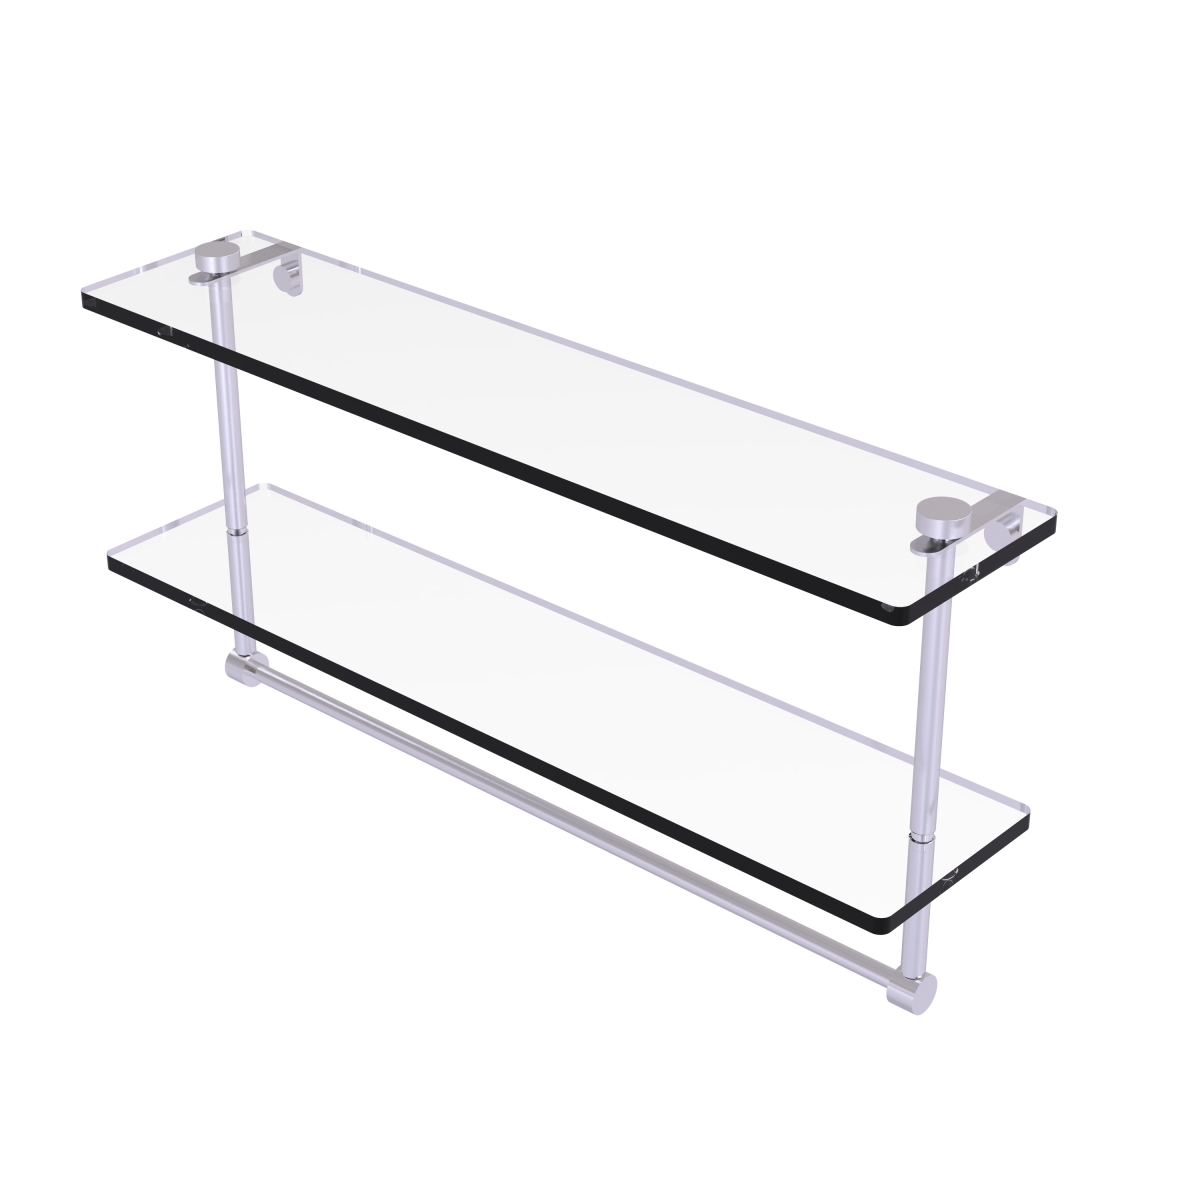 Allied Brass NS-2-22TB-SCH 22 in. Two Tiered Glass Shelf with Integrated Towel Bar, Satin Chrome - 12 x 5 x 22 in.